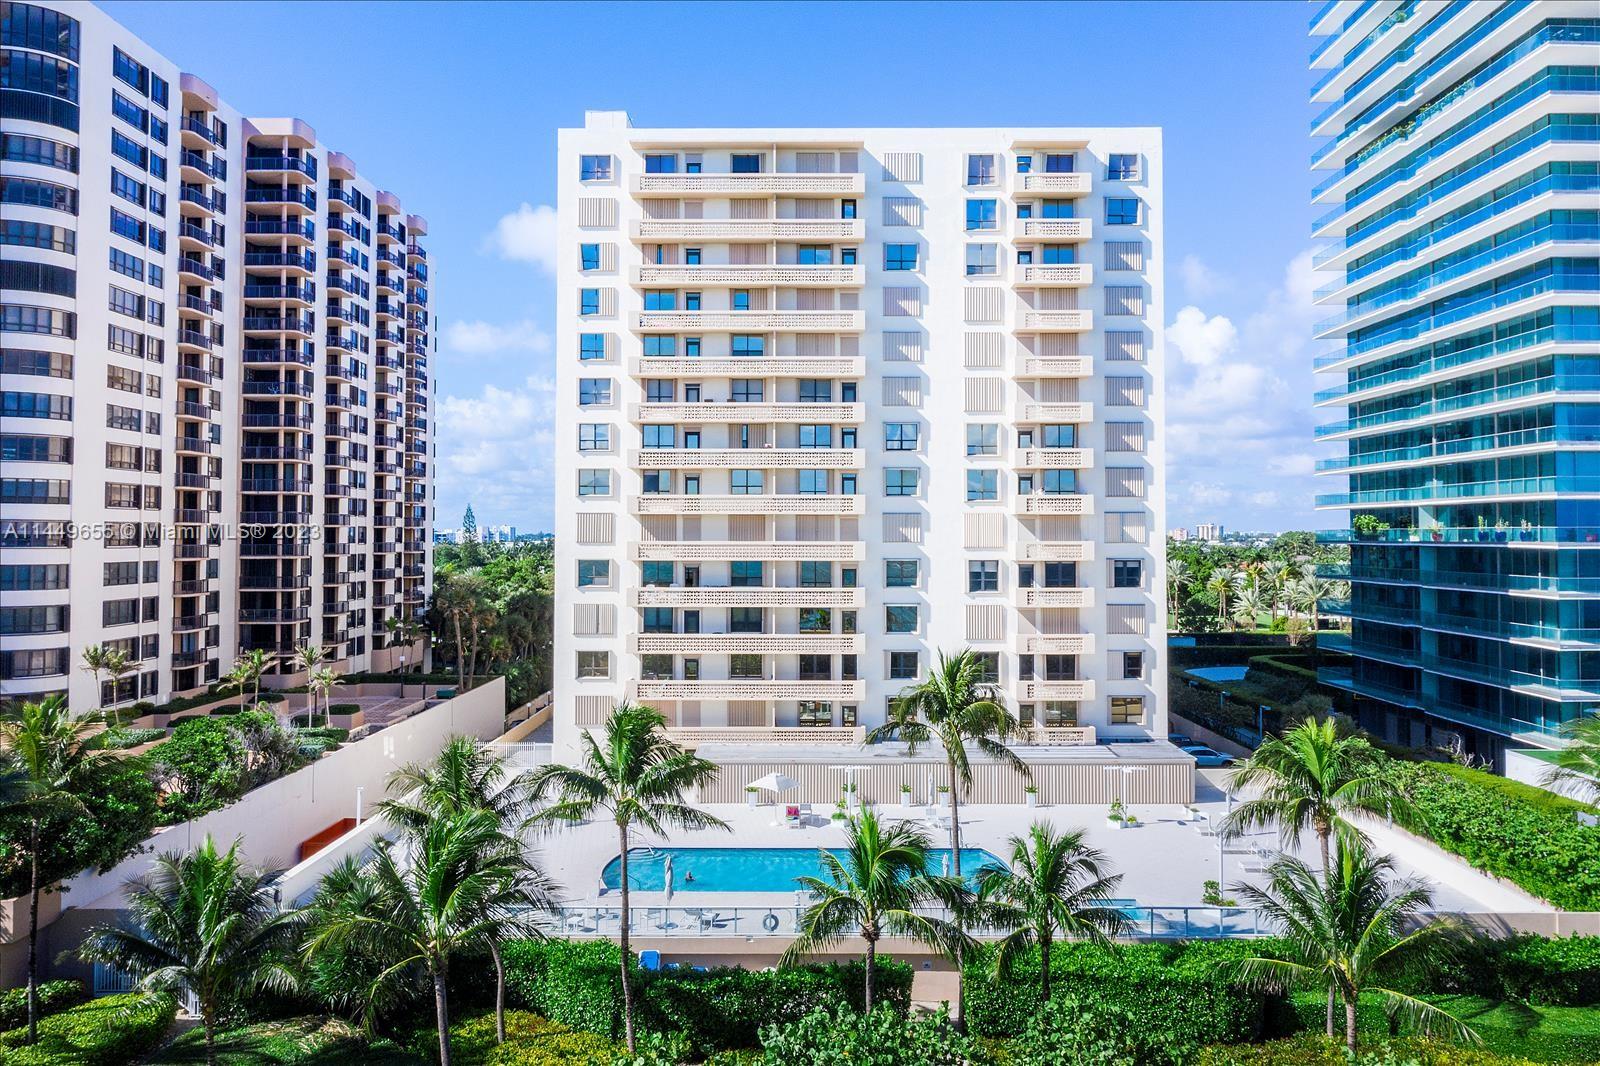 One Bedroom One Bath Tile Floors with Ocean Views. Extra room for guest or office. Full-Service Building with Cable, Internet and Valet Parking. Large Pool and Gym. Near Bal Harbour Shops, and Restaurants  Fabulous Location !! 24 Hours notice to show !! Tenant Occupied. Lease ends on November 30,2023.